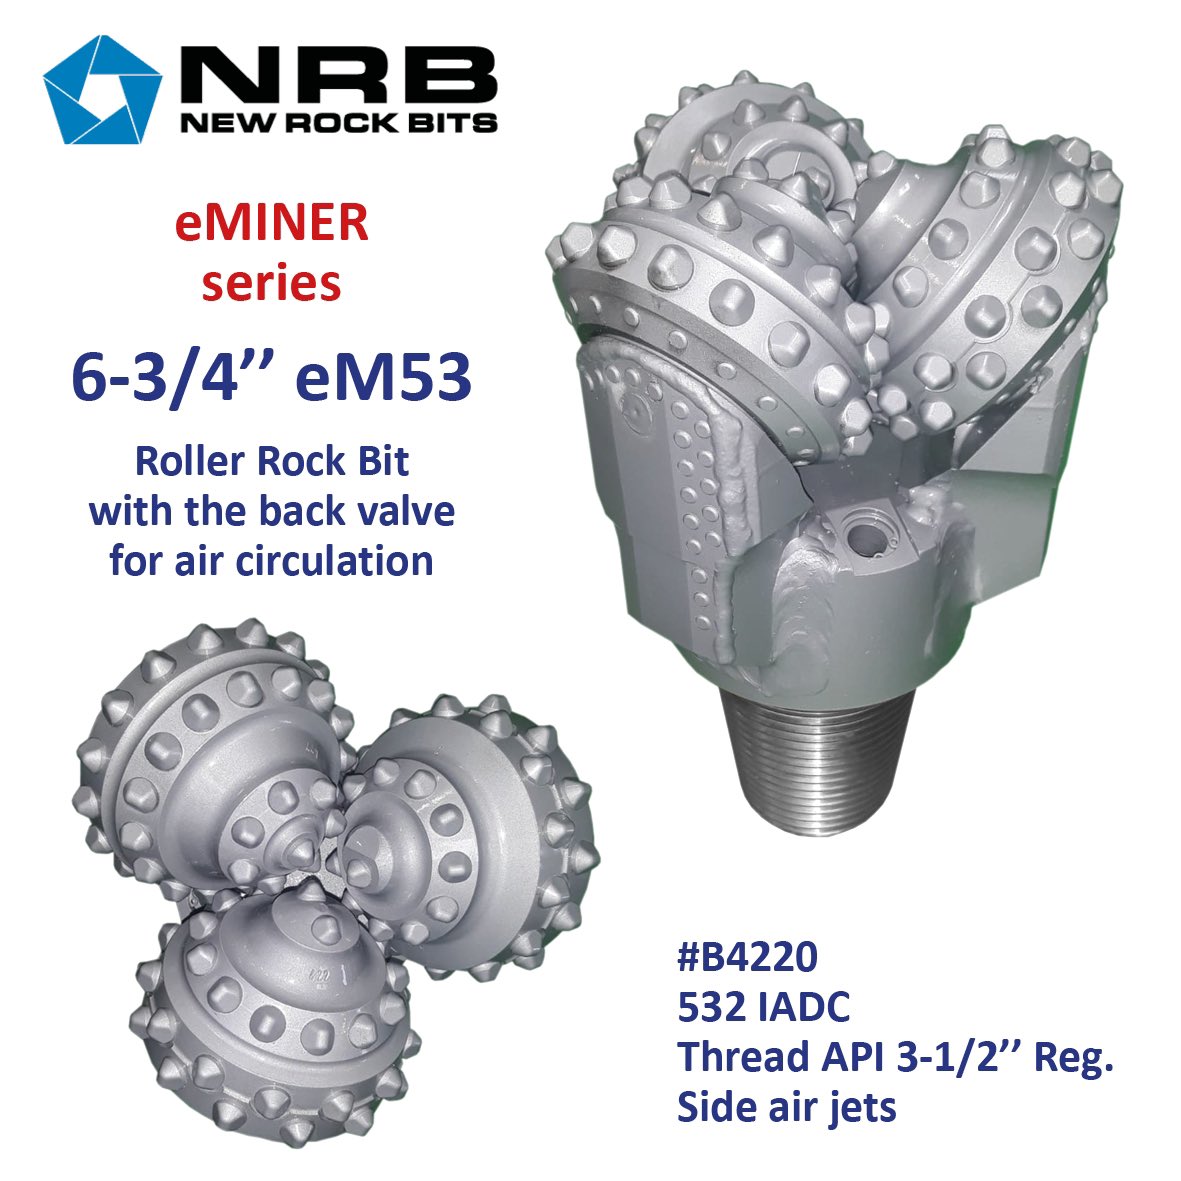 NRB presents 6-3/4’’ eM53 bits (532 IADC) from eMINER series for a drilling of blastholes in mines
#nrbbits #newrockbits #tricones #brocas #drillers #perforaciones #groundwaterweek #drillersclub #aquapozos #mining #miningequipment #miningbits #blastholedrilling #blastholedrill